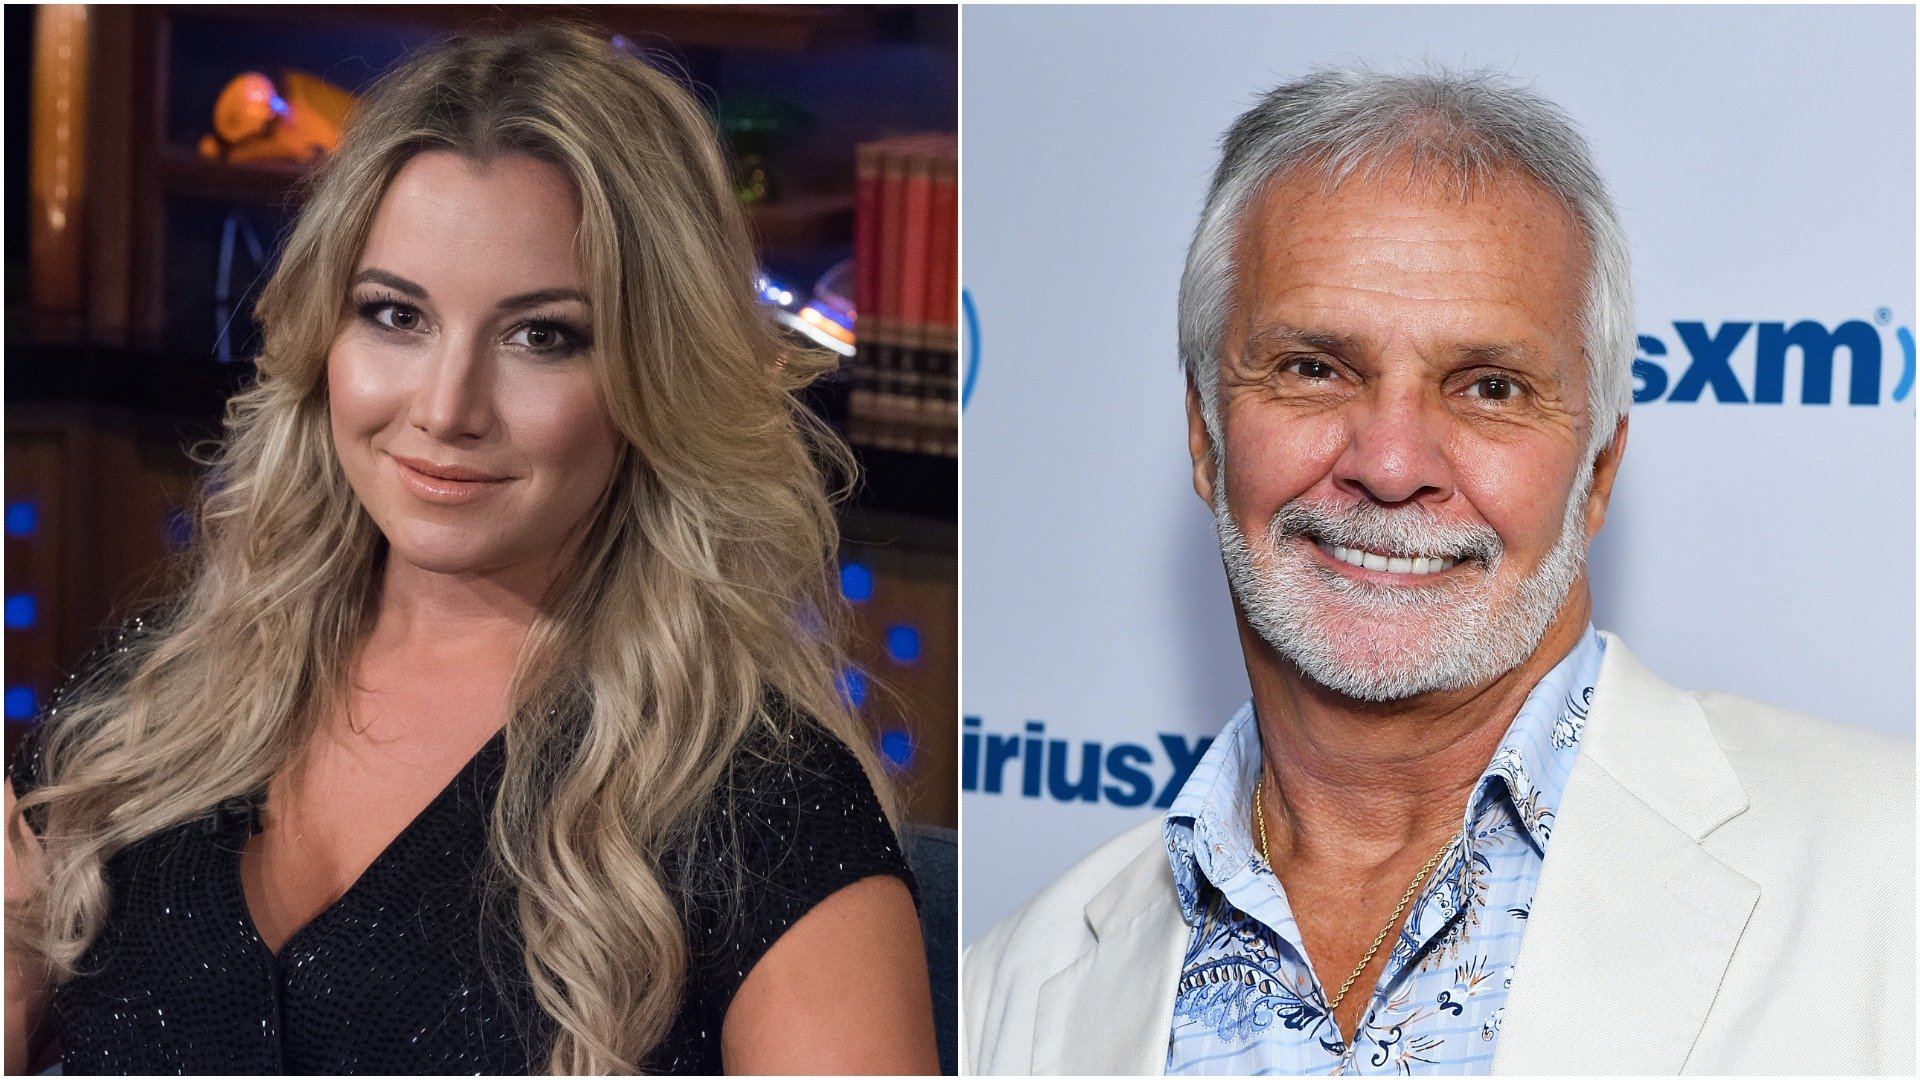 Hannah from Below Deck says she used to call Captain Lee Rosbach for support